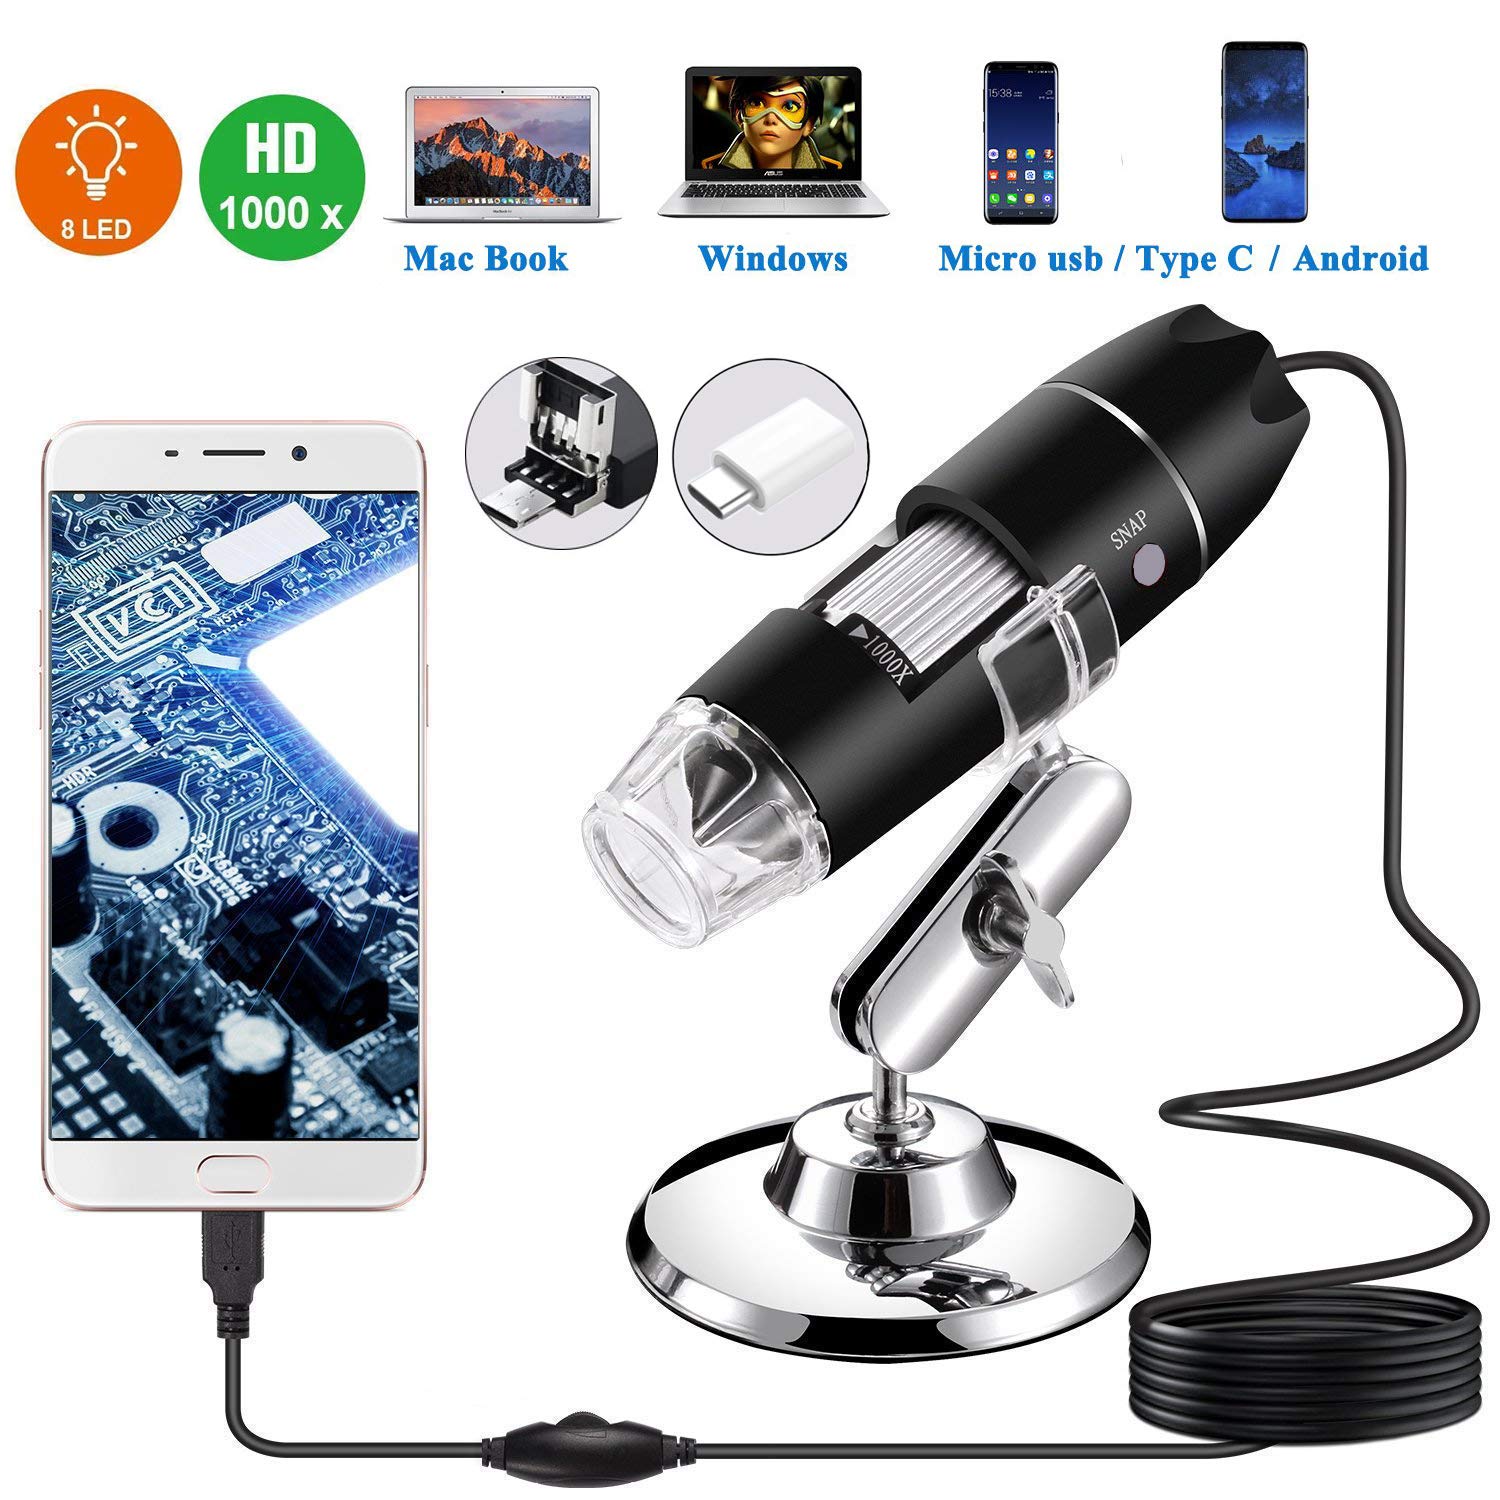 Windows Mac Linux USB Microscope,1000x Zoom Digital Mini Microscope Camera with OTG Adapter and Metal Stand, Compatible for Micro USB Type-C Android 